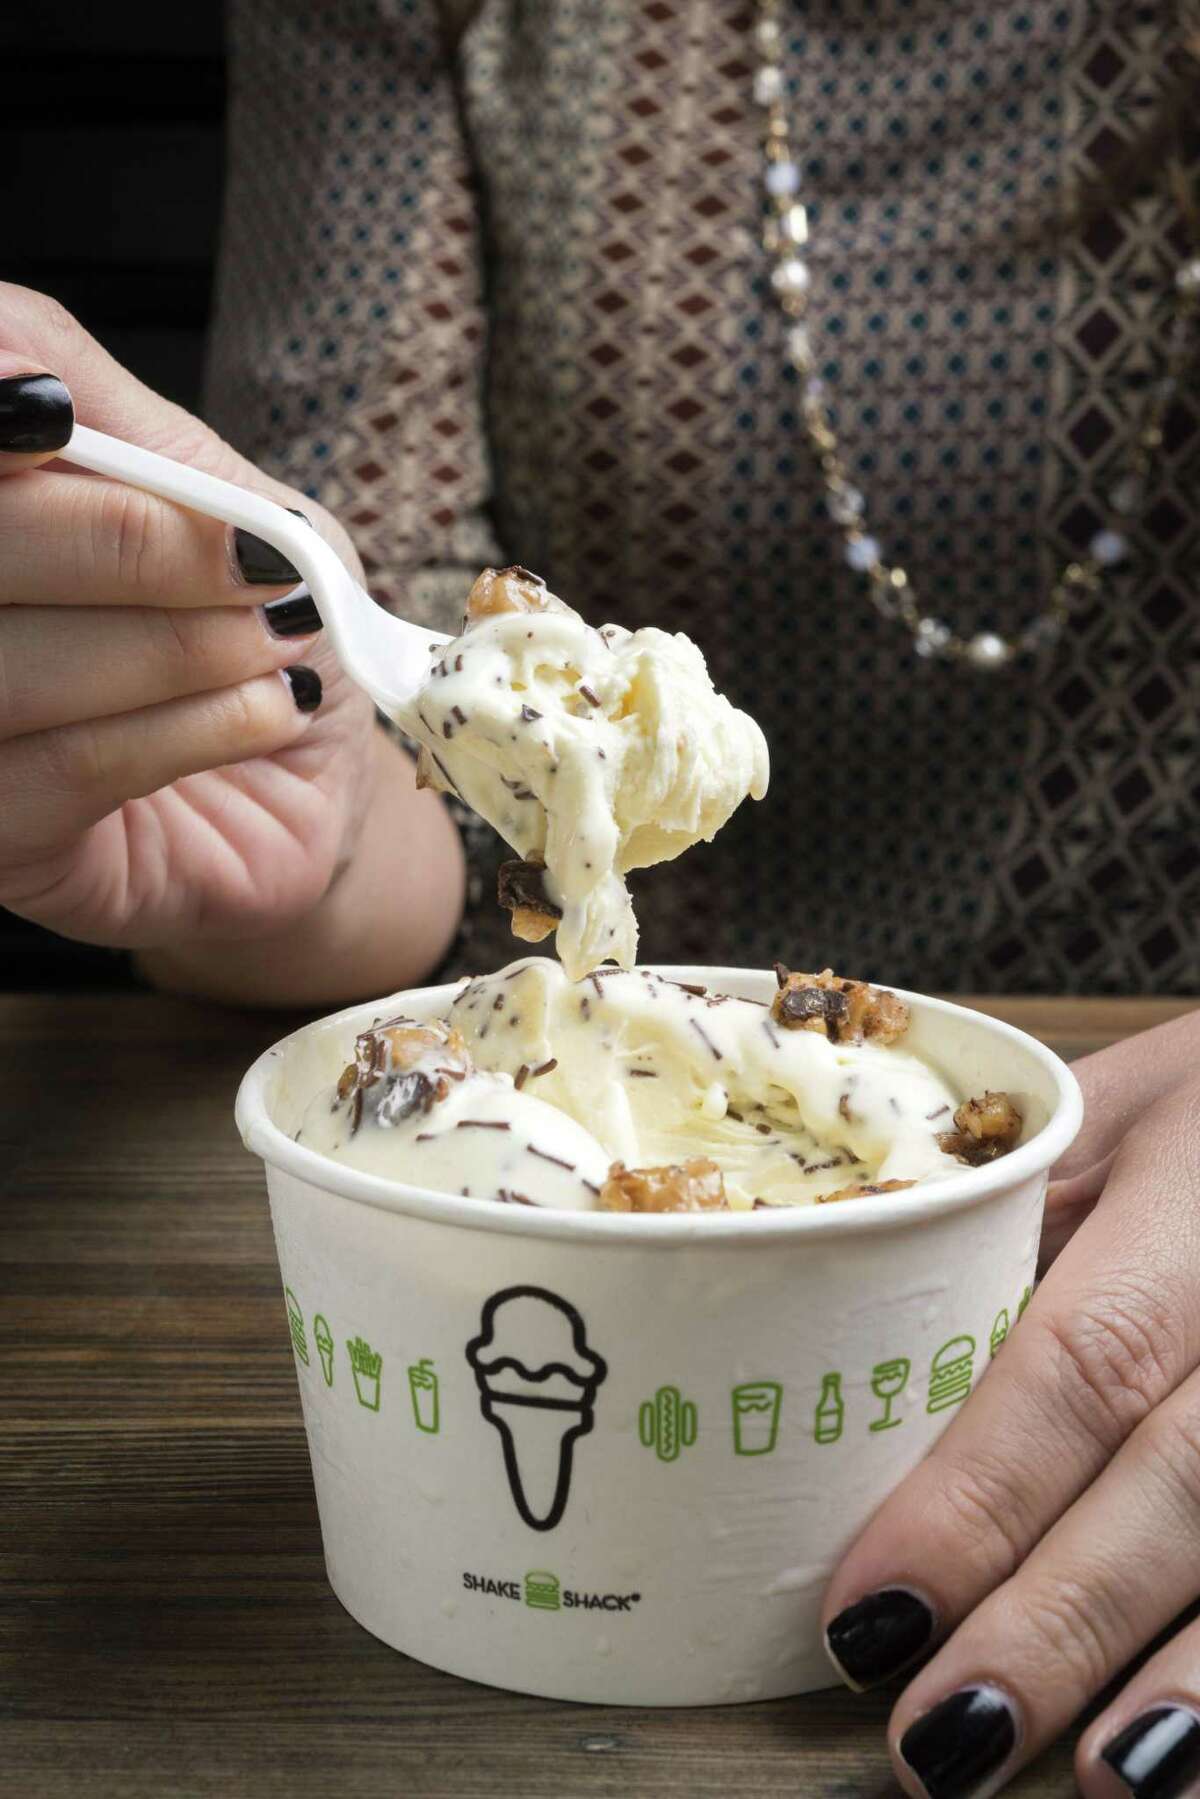 Concrete (frozen custard blended with mix-ins) from Shake Shack.